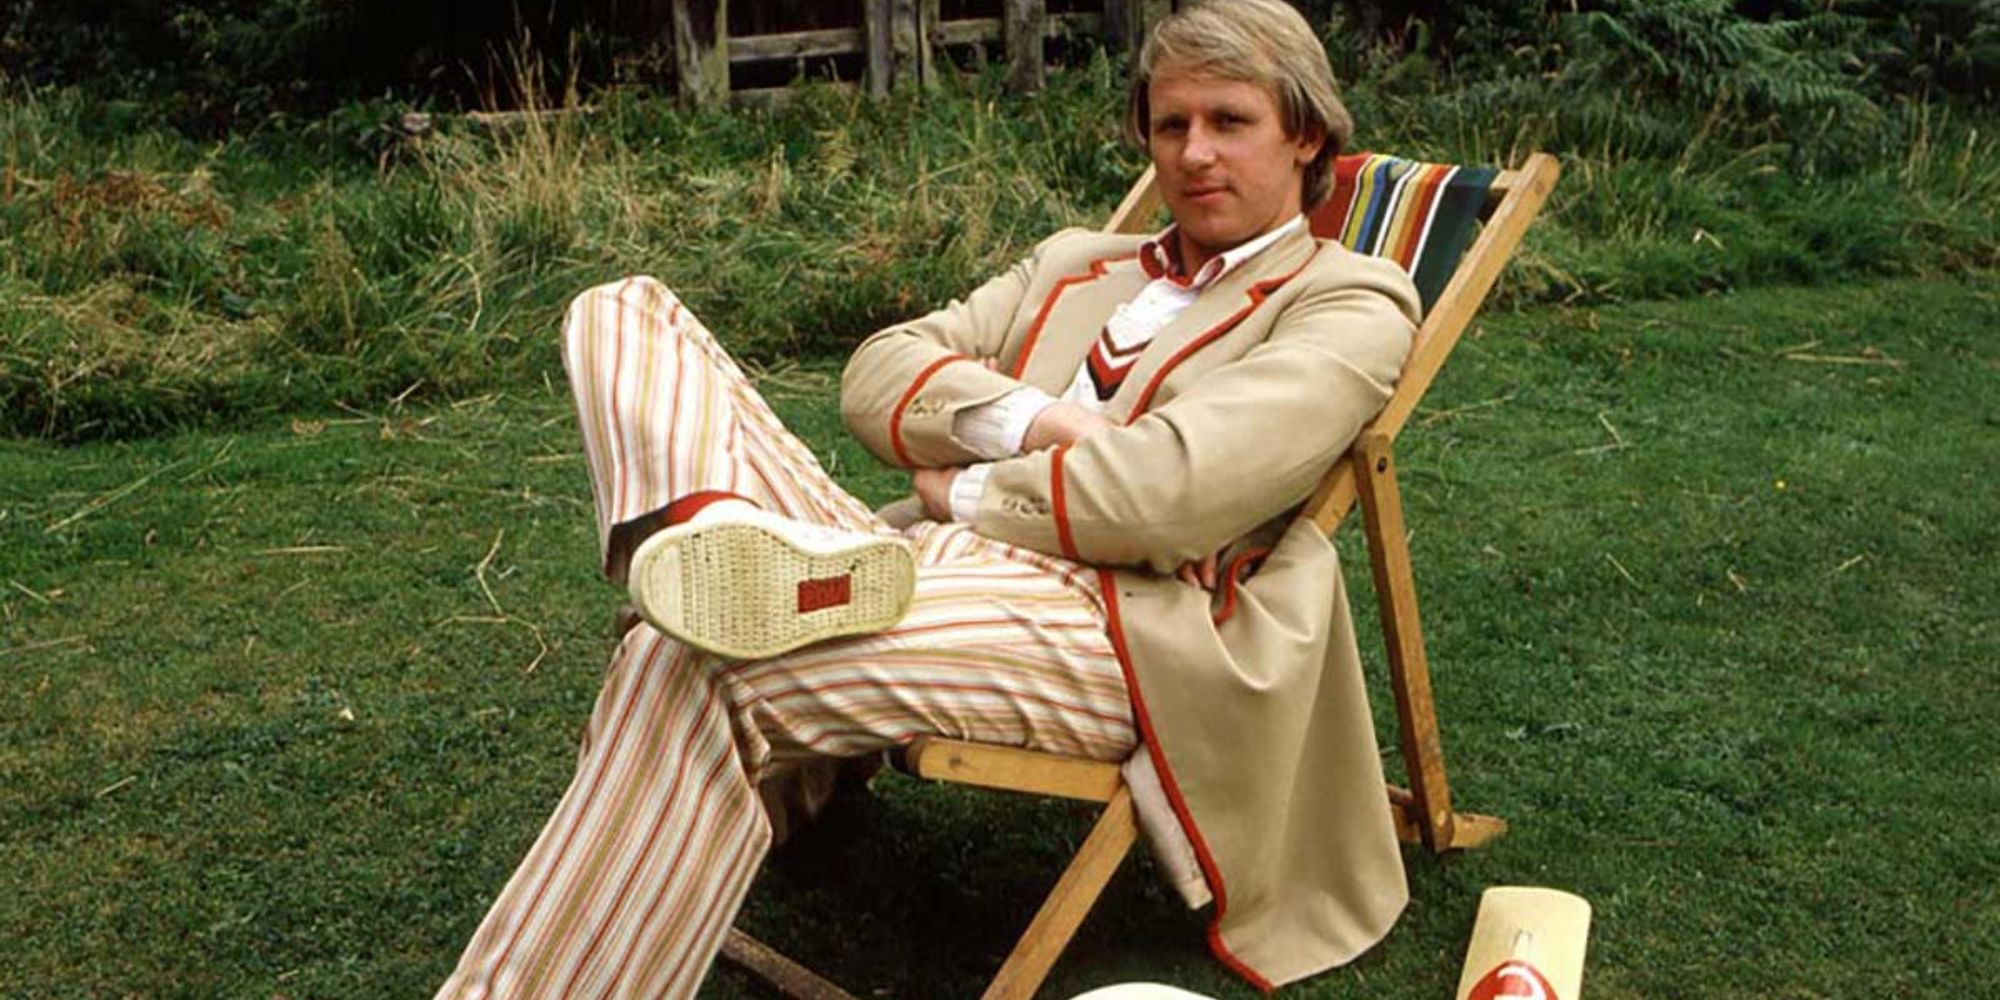 5th Doctor sitting in a picnic chair on a field with a cricket bat